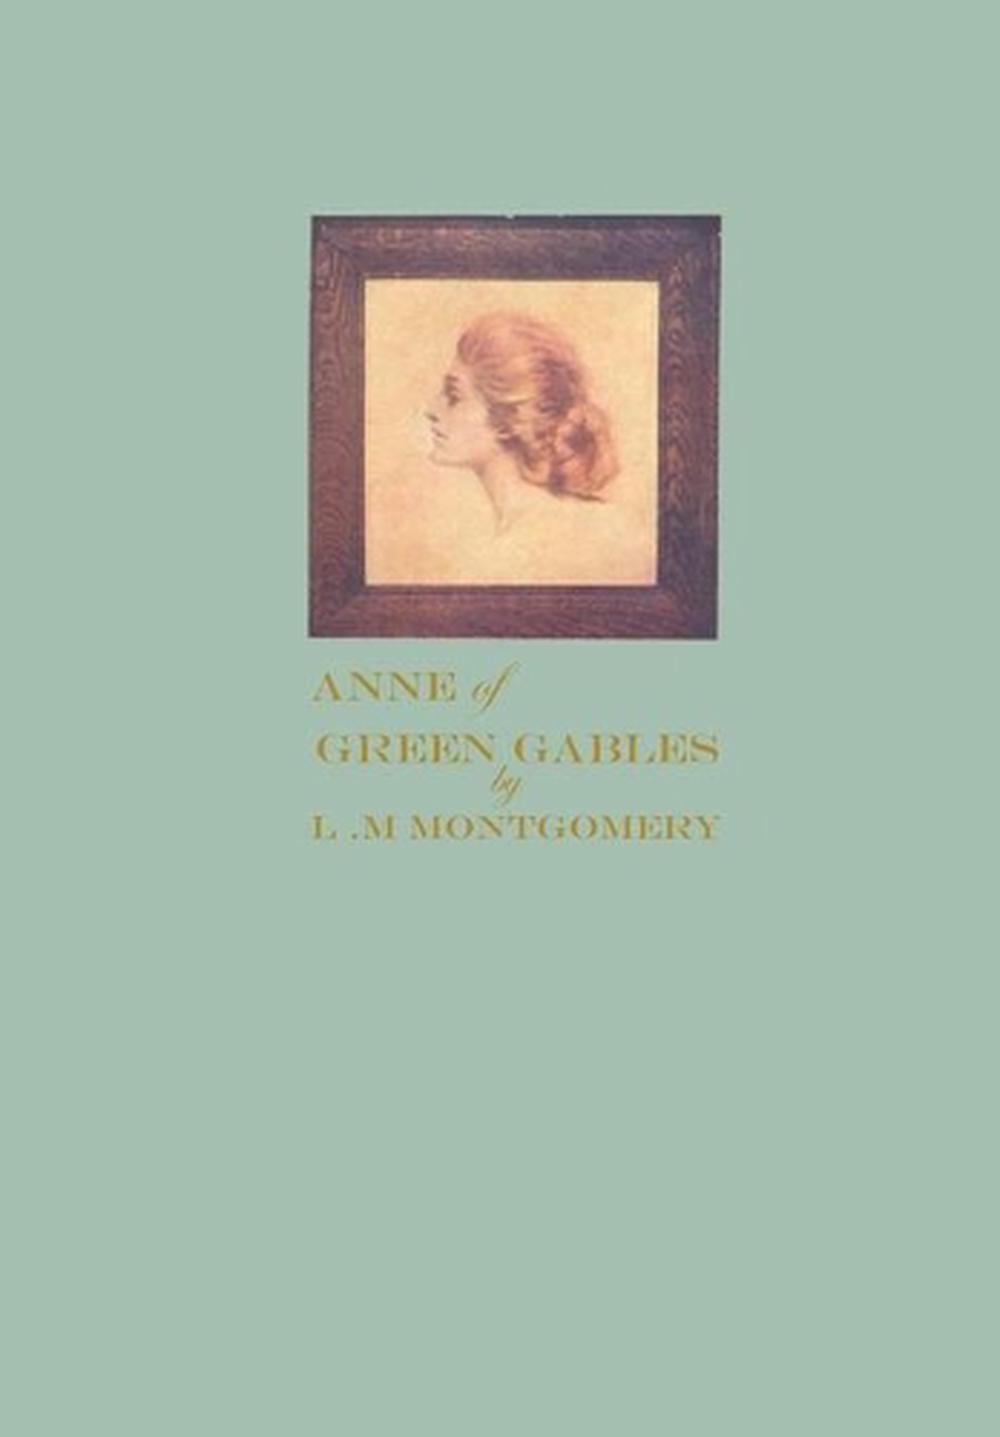 anne of green gables hardcover